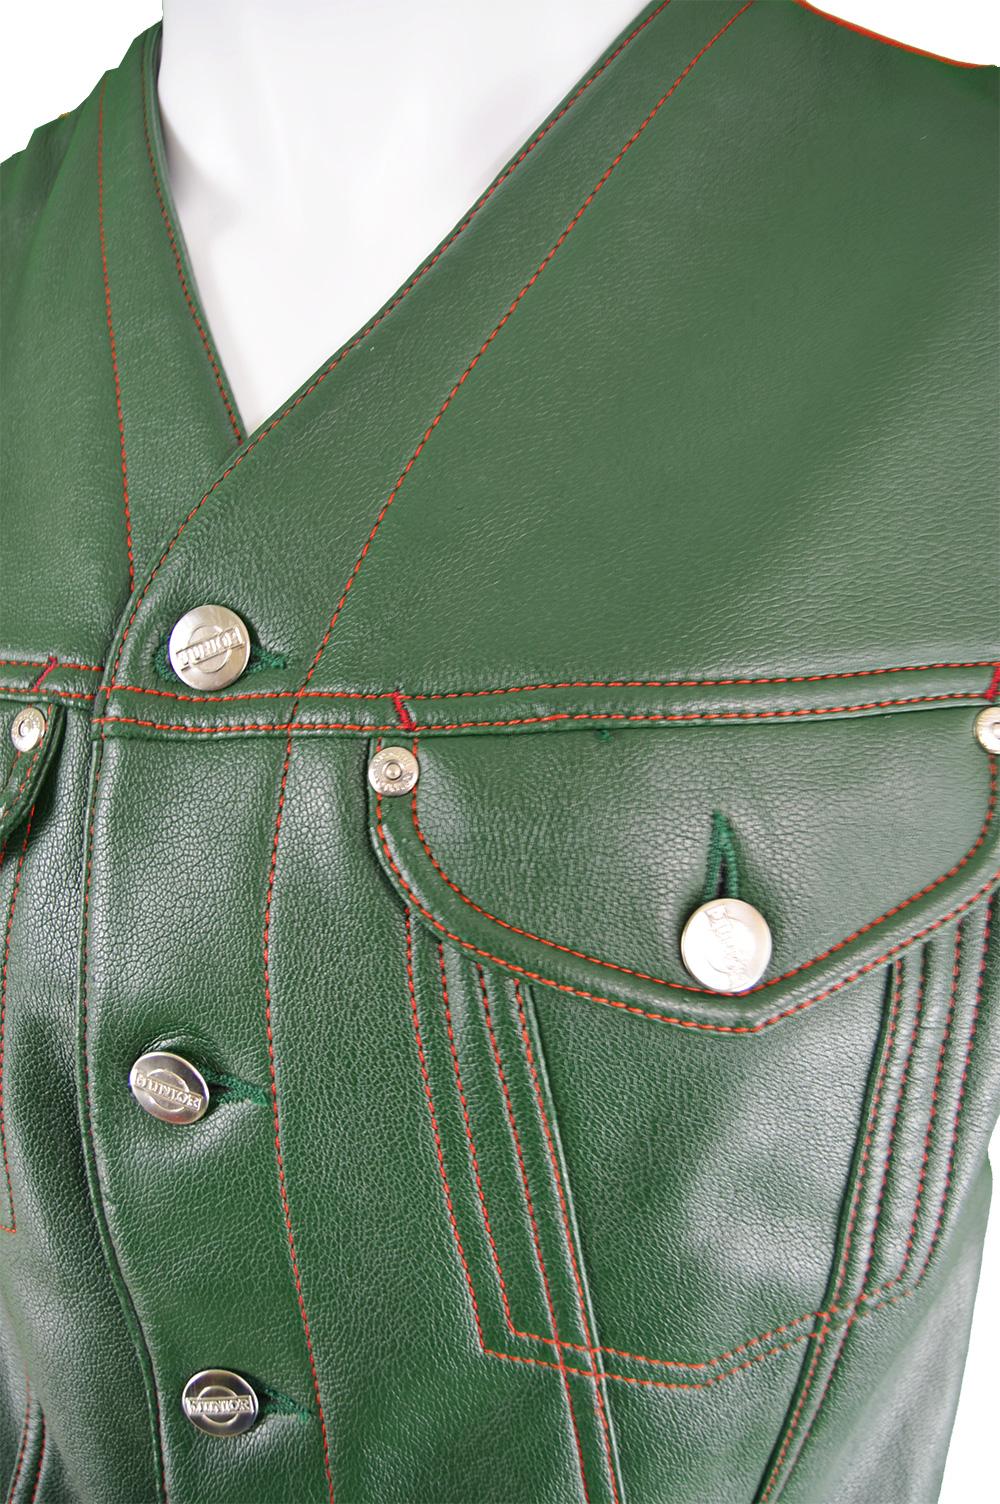 Jean Paul Gaultier Men's Green Faux Leather Vest with Red Taffeta Back, 1980s In Good Condition For Sale In Doncaster, South Yorkshire